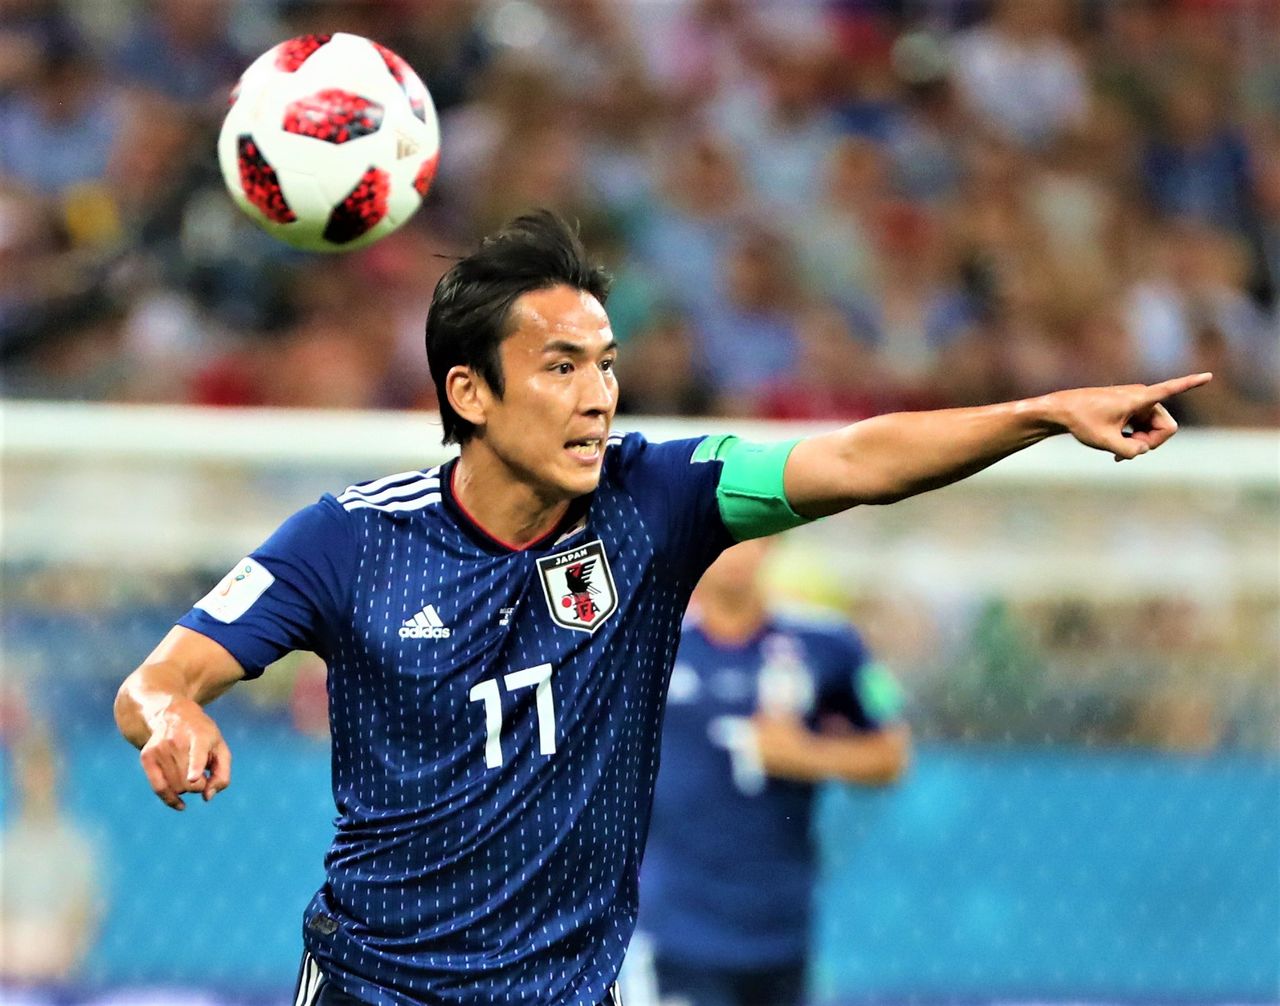 Hasebe shouts instructions during a World Cup match in Rostov-on-Don, Russia, on July 2, 2018. He served as Japan captain at the 2014 and 2018 FIFA World Cups. (© Jiji)